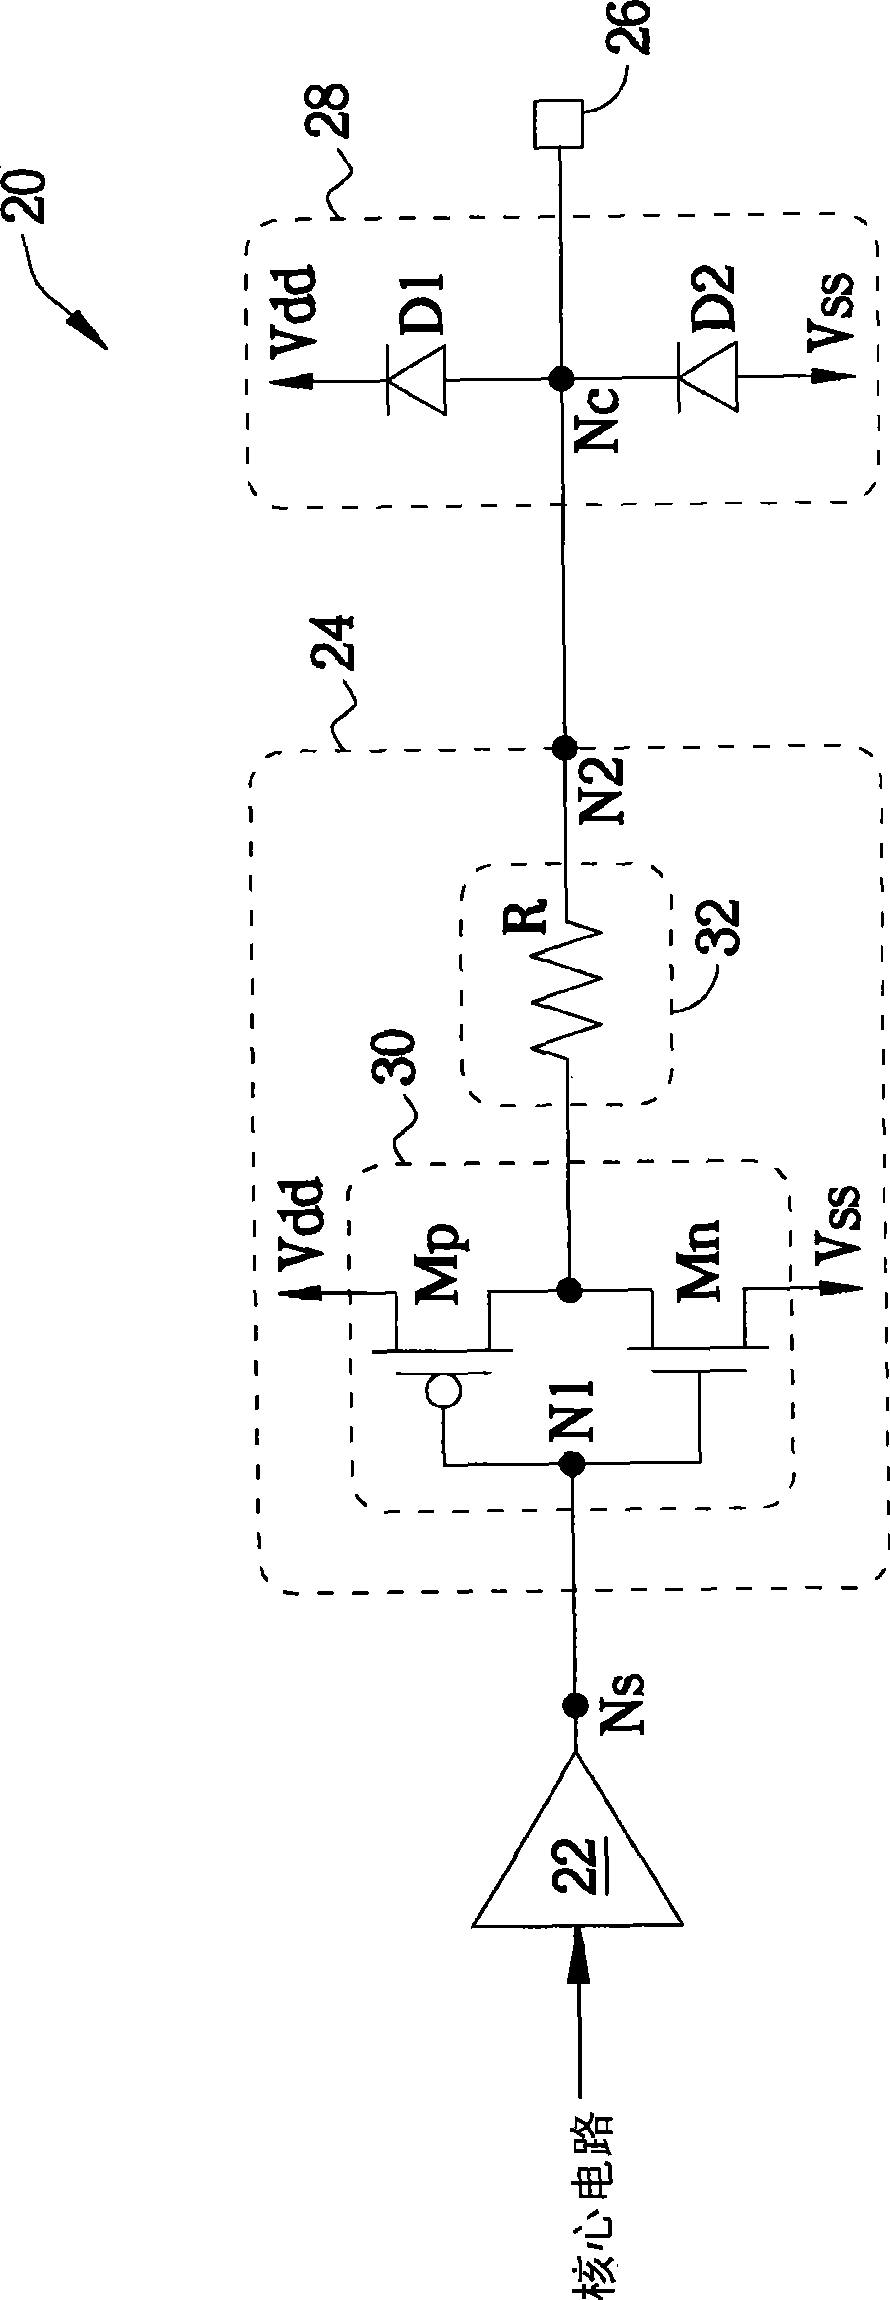 Output/input circuit with small area